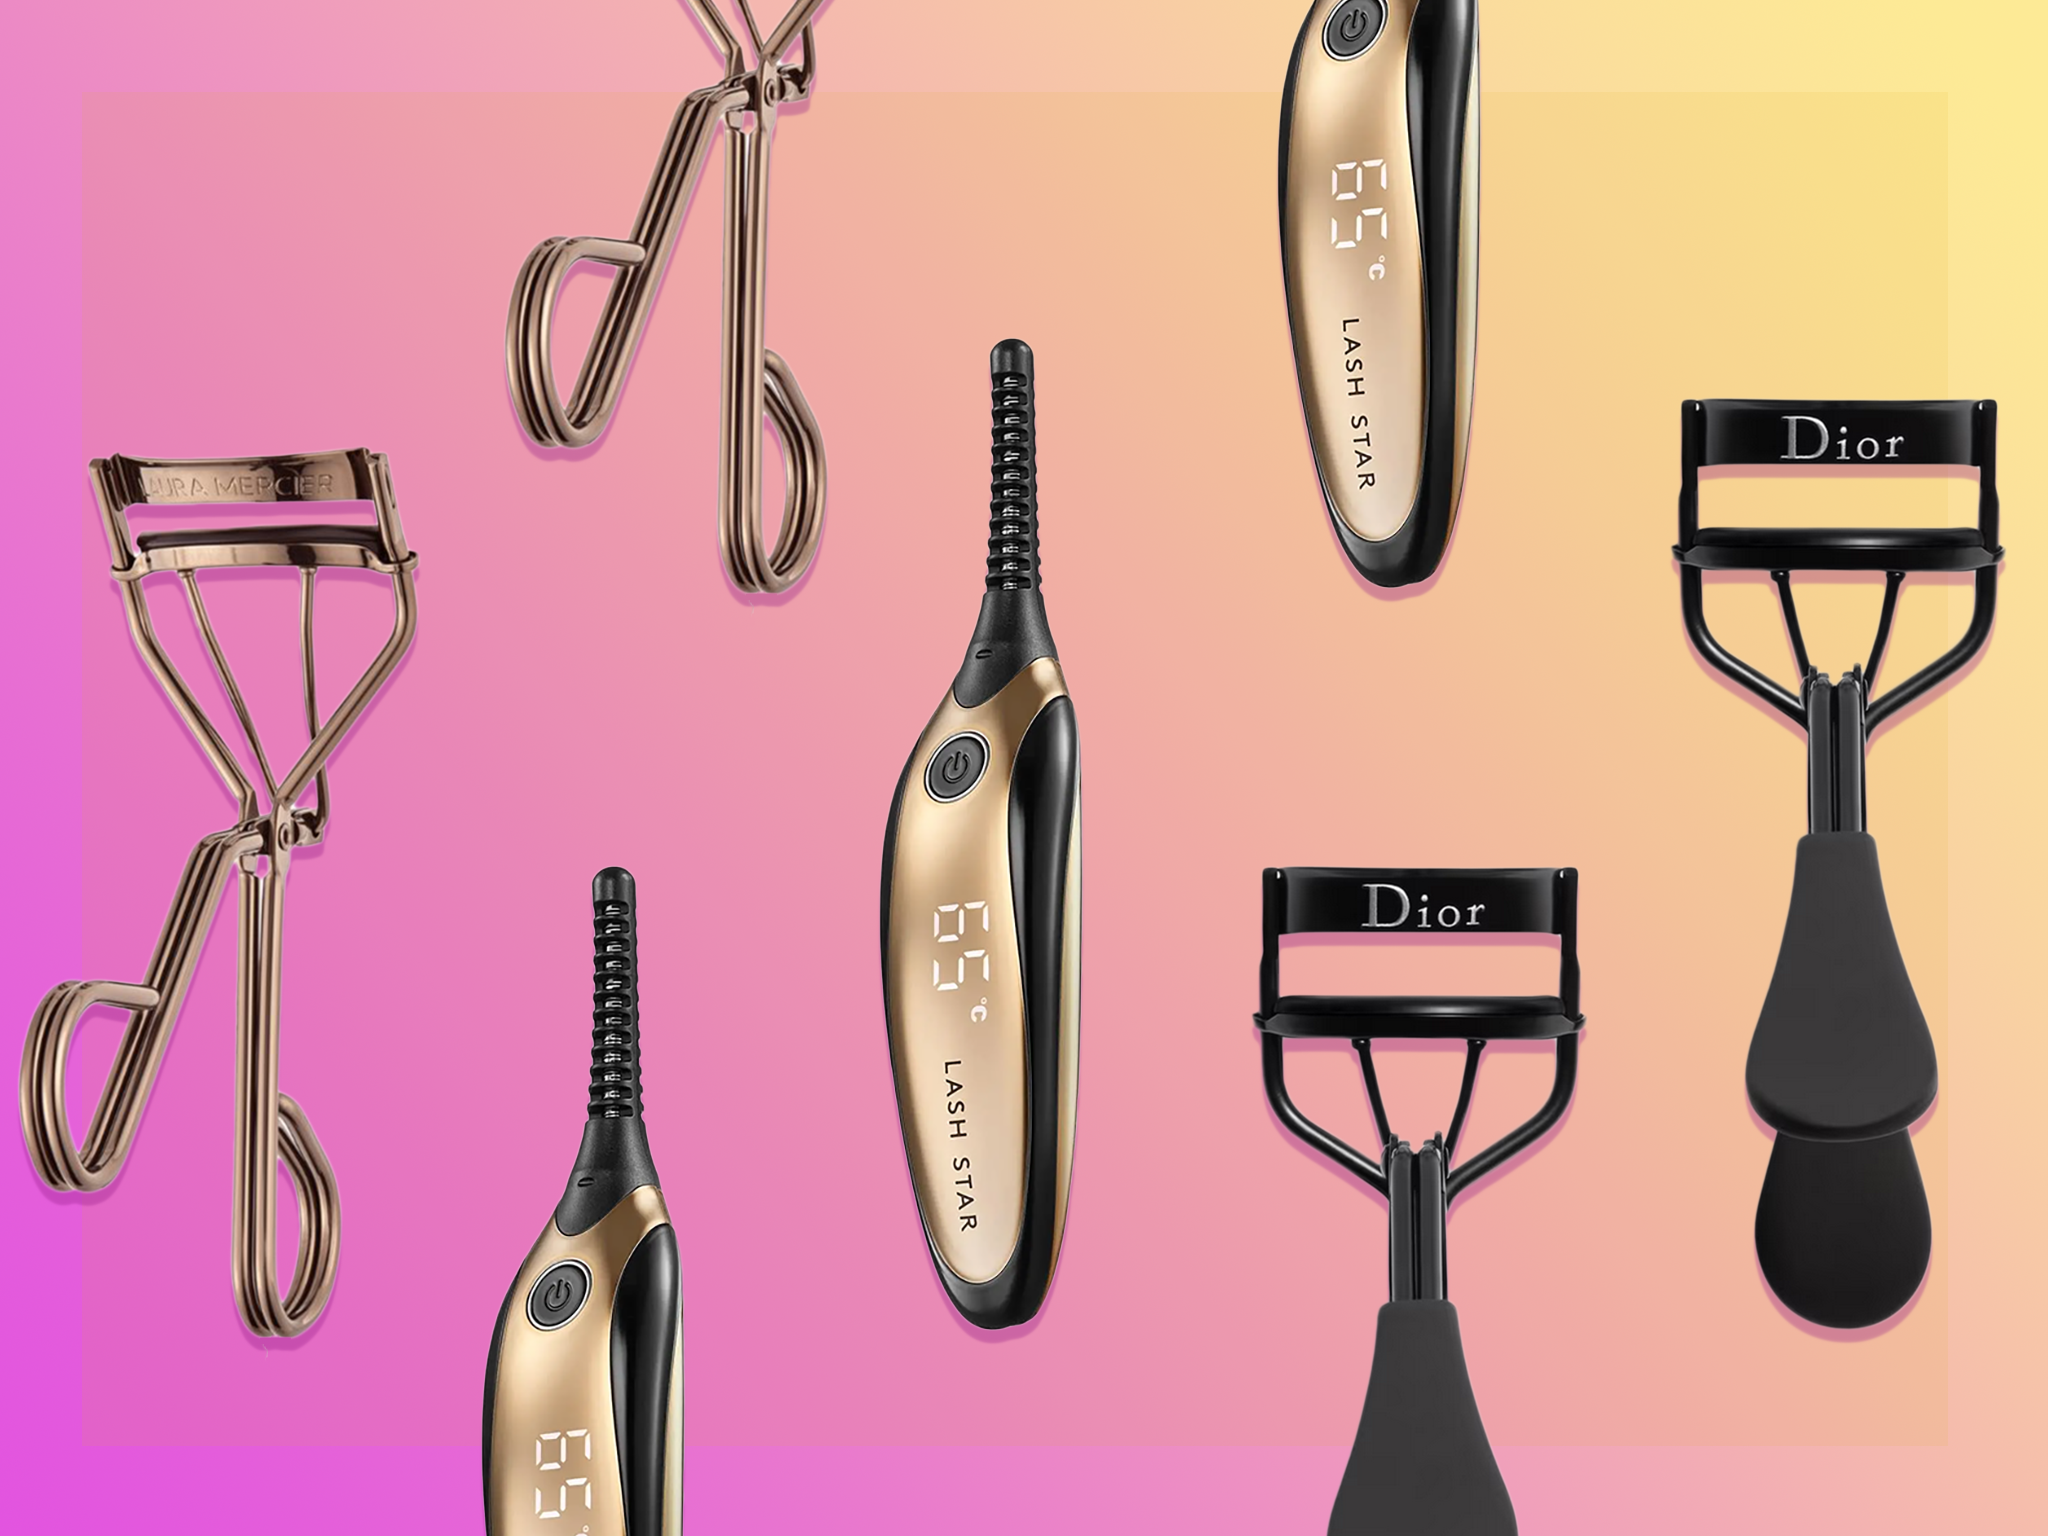 Whether you have long or short, thick or thin lashes, we’ve found the perfect curler for you